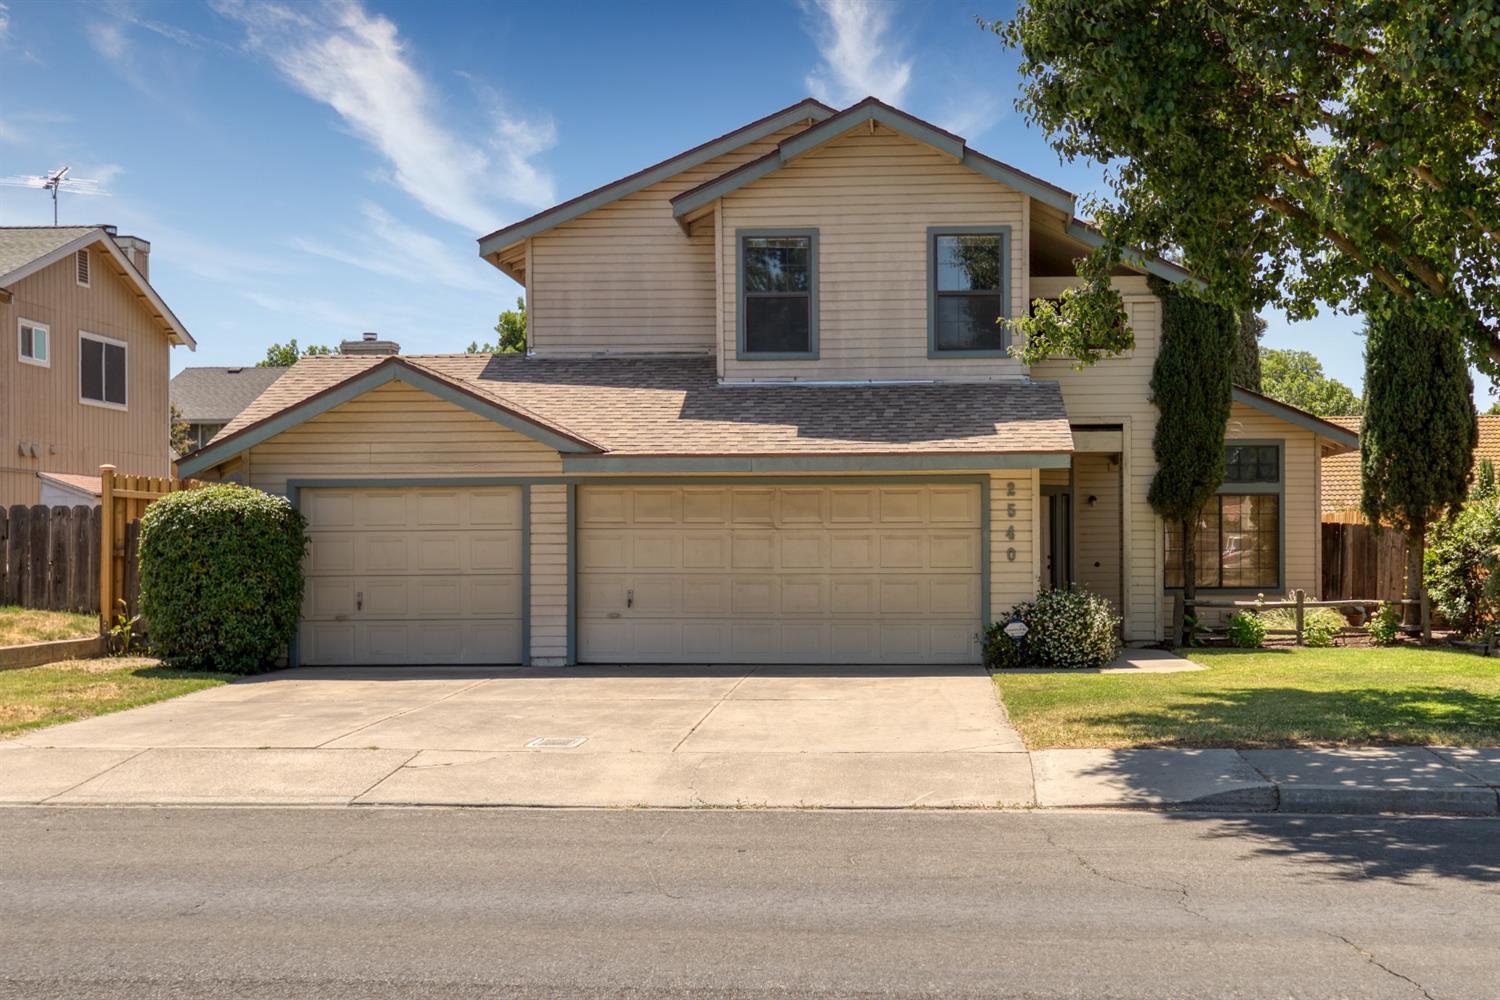 2540-merle-ave-modesto-ca-95355-mls-221044045-coldwell-banker